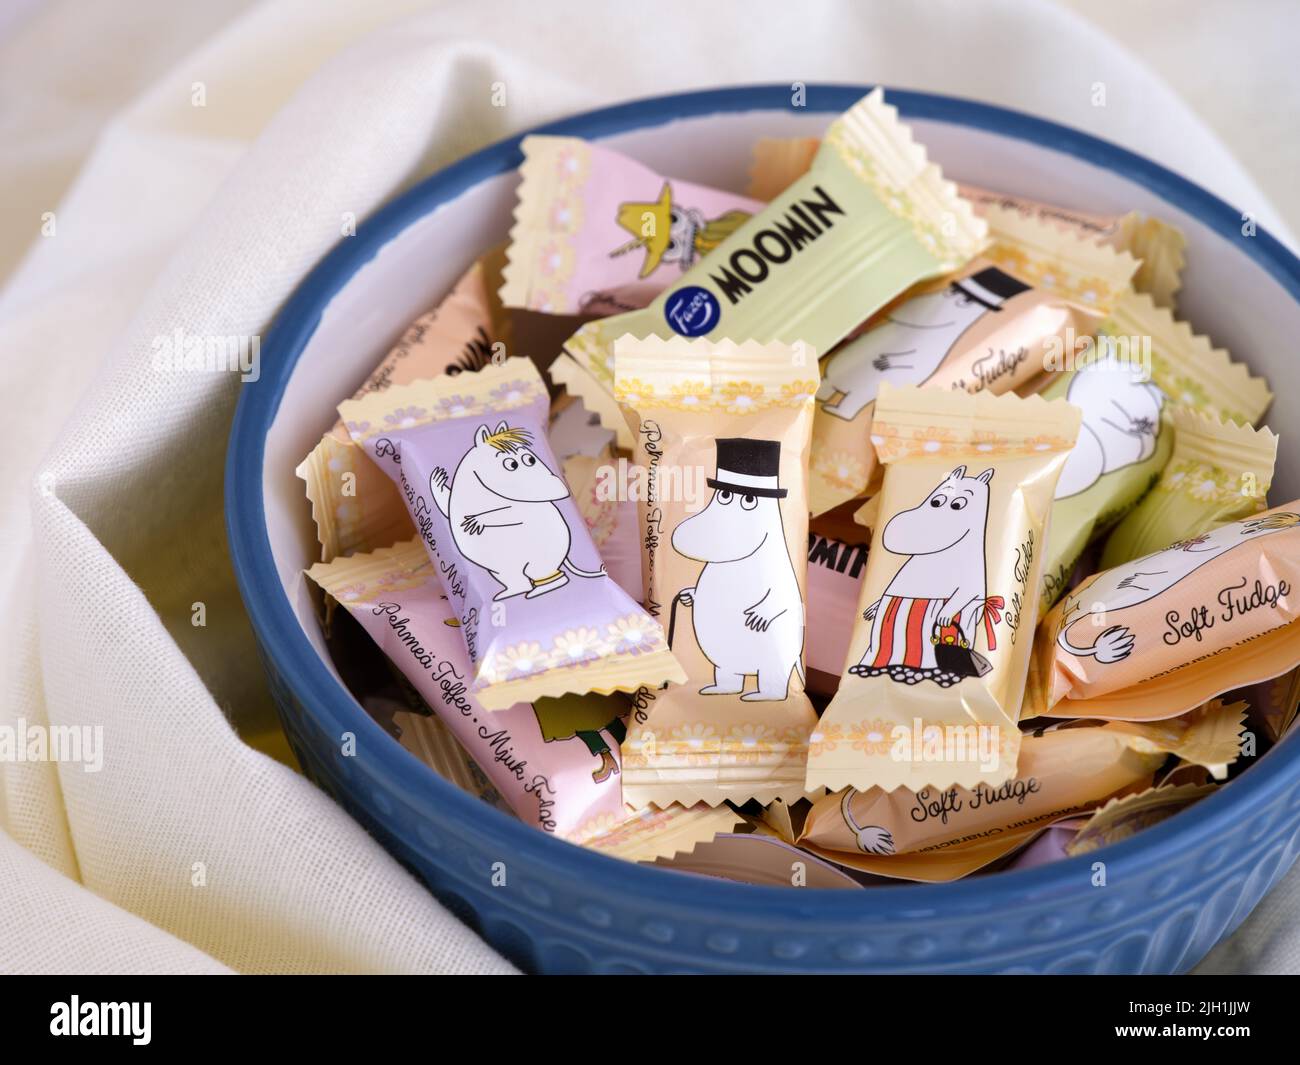 Tambov, Russian Federation - April 27, 2022 A Bowl full of Moomin Soft fudge candies by Fazer. The fudge comes single wrapped, with 9 different charac Stock Photo